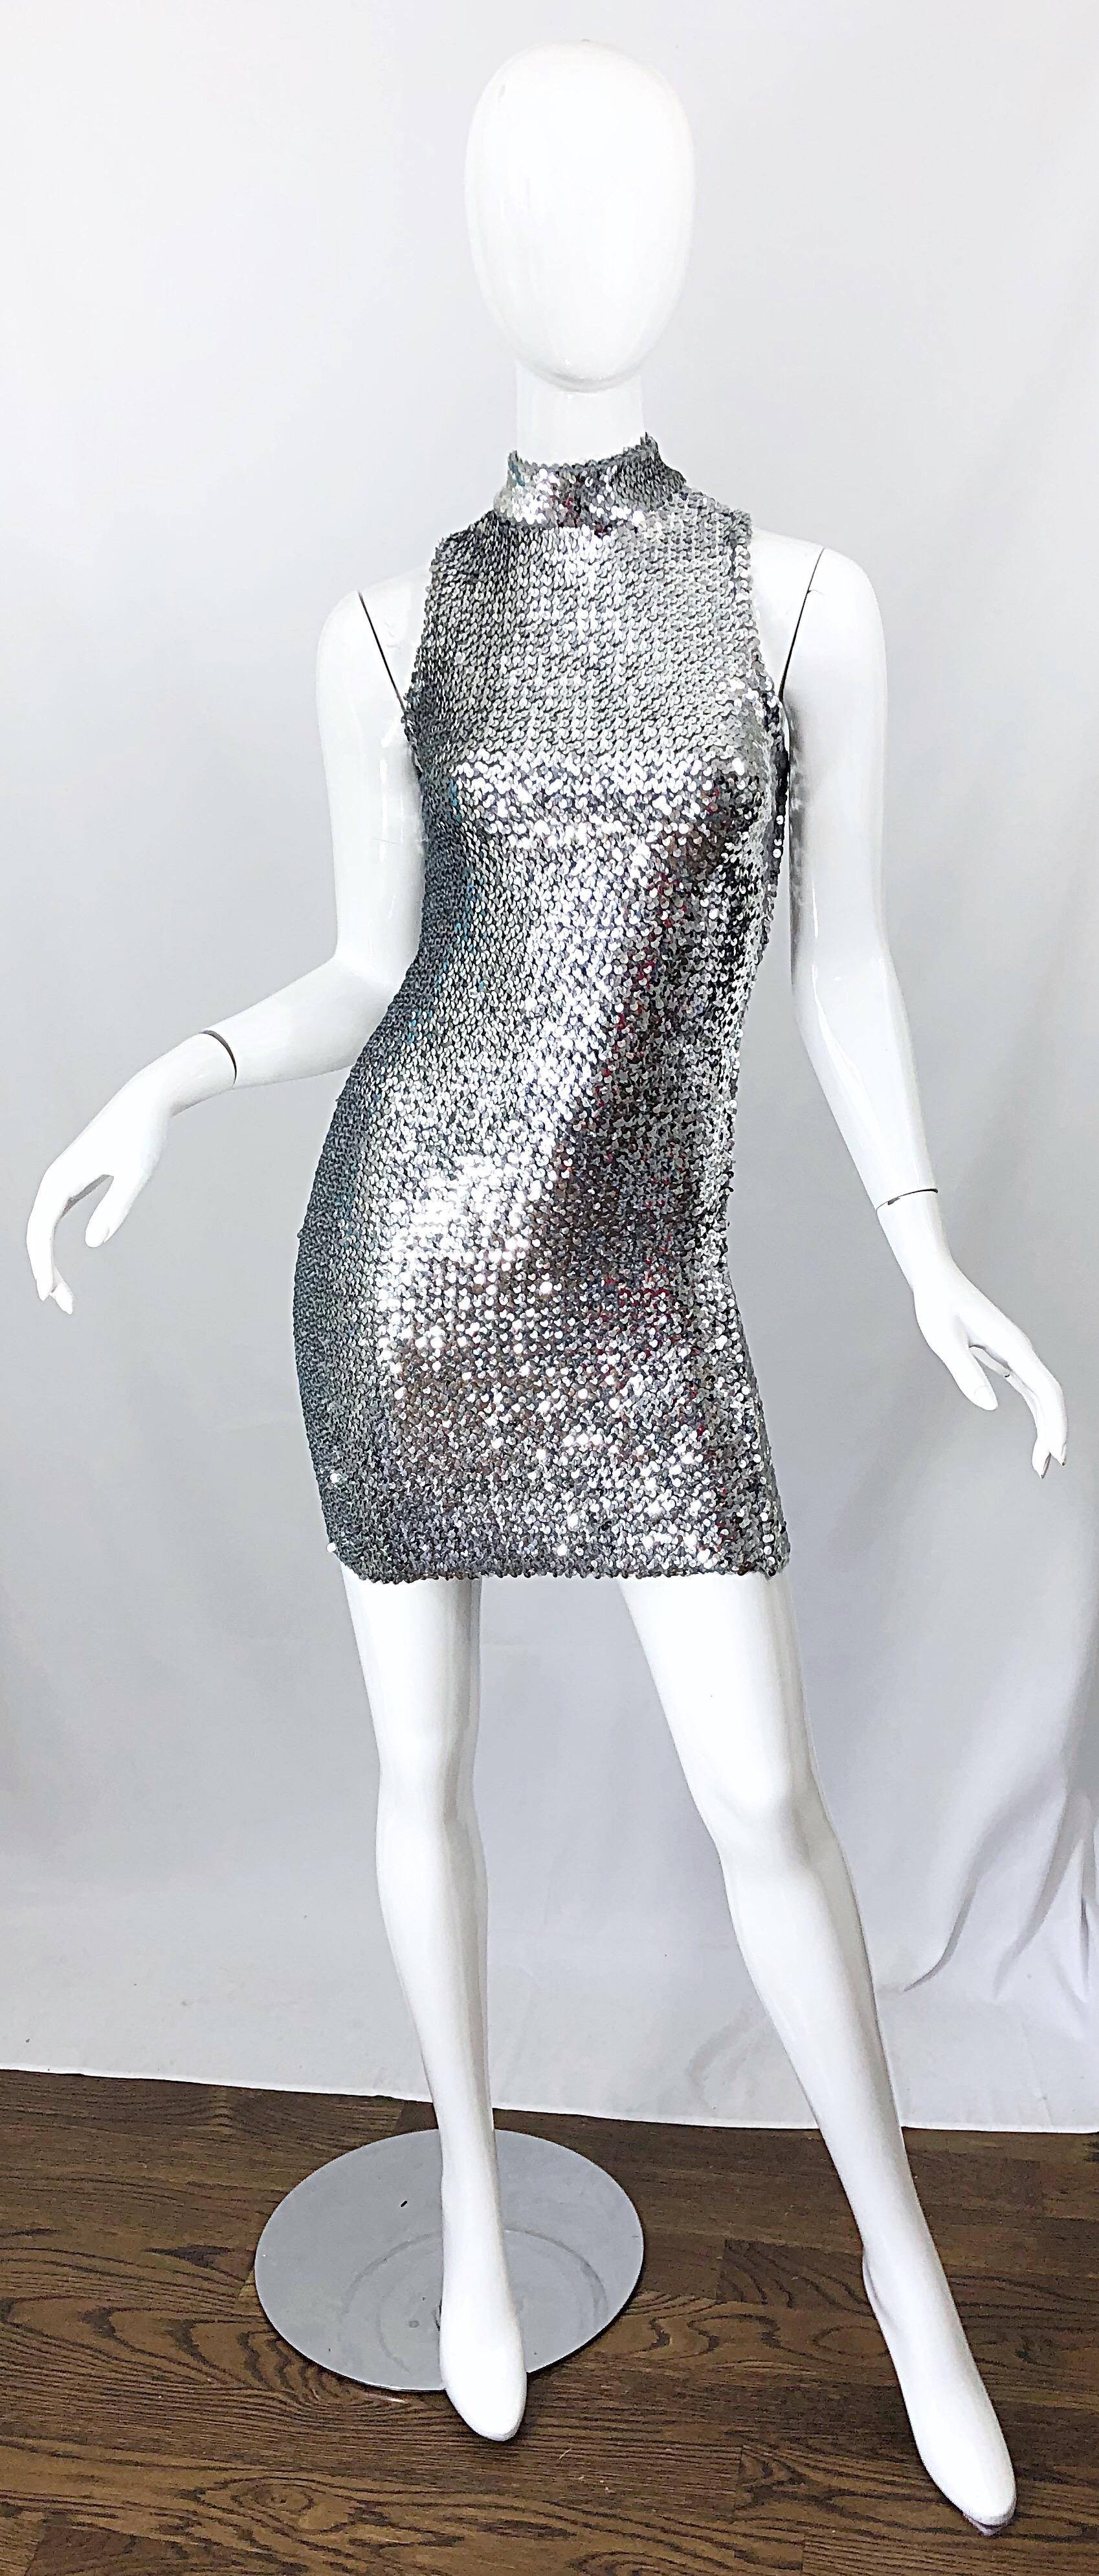 Chic 1960s HATTIE CARNEGIE silver fully sequined vintage open back mini dress! Features thousands of 
hand-sewn silver sequins throughout on a soft stretch knit. Simply slips over the head and stretches to fit. Open back has velcro closure at top